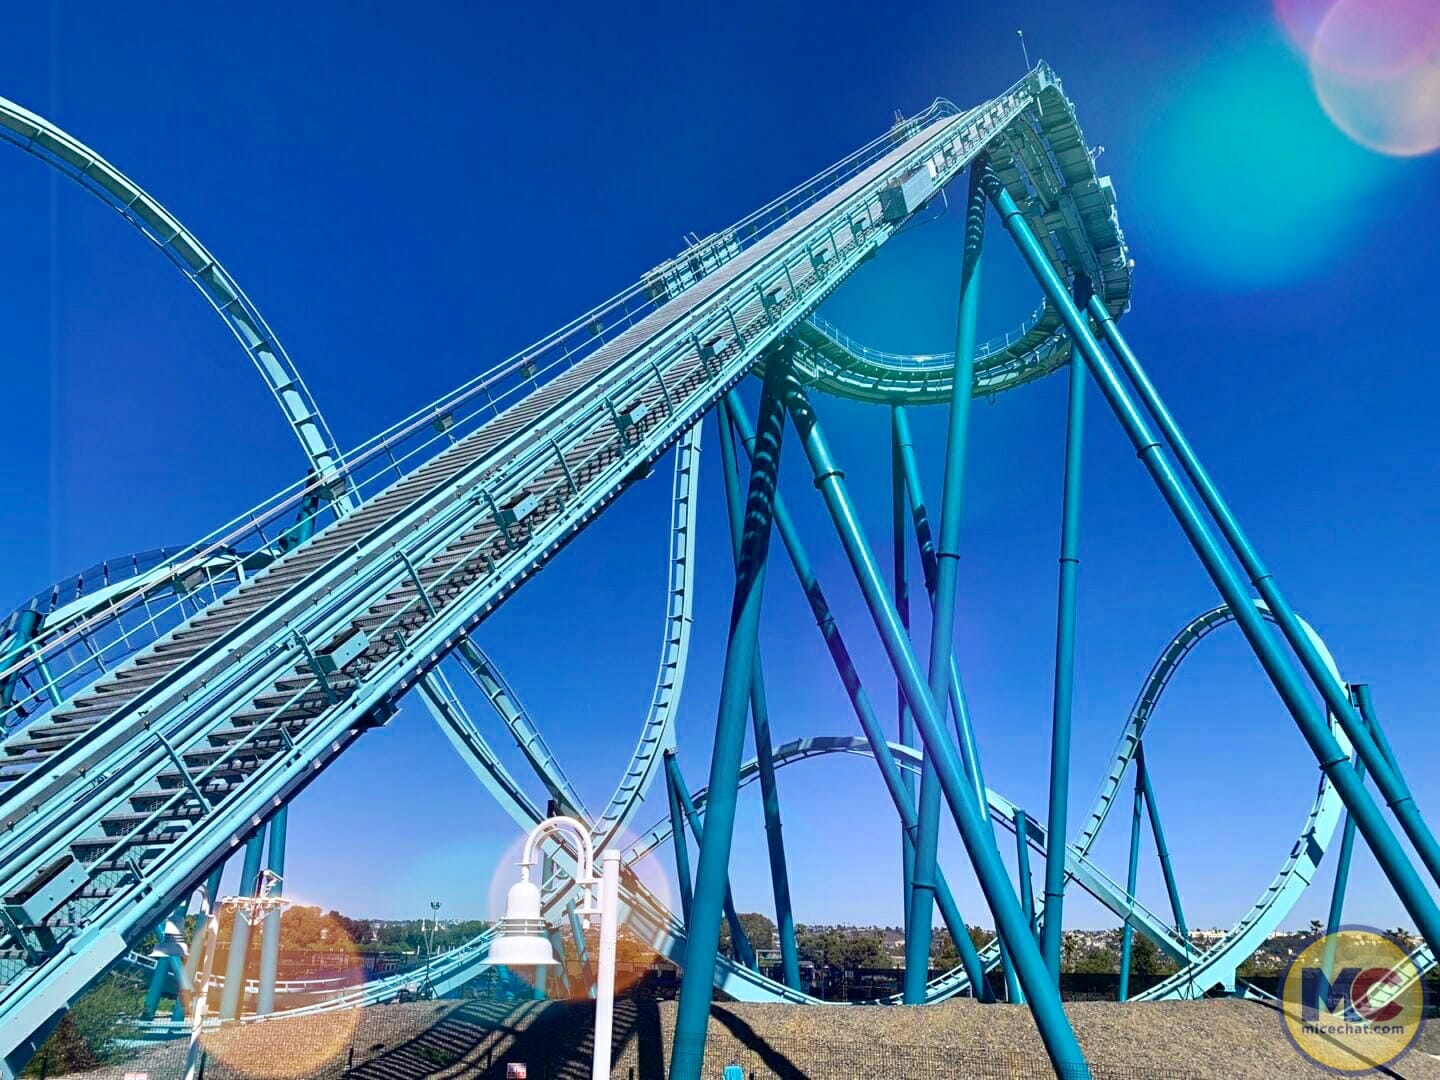 NEW COASTER: Emperor Dives into SeaWorld San Diego Starting March 12